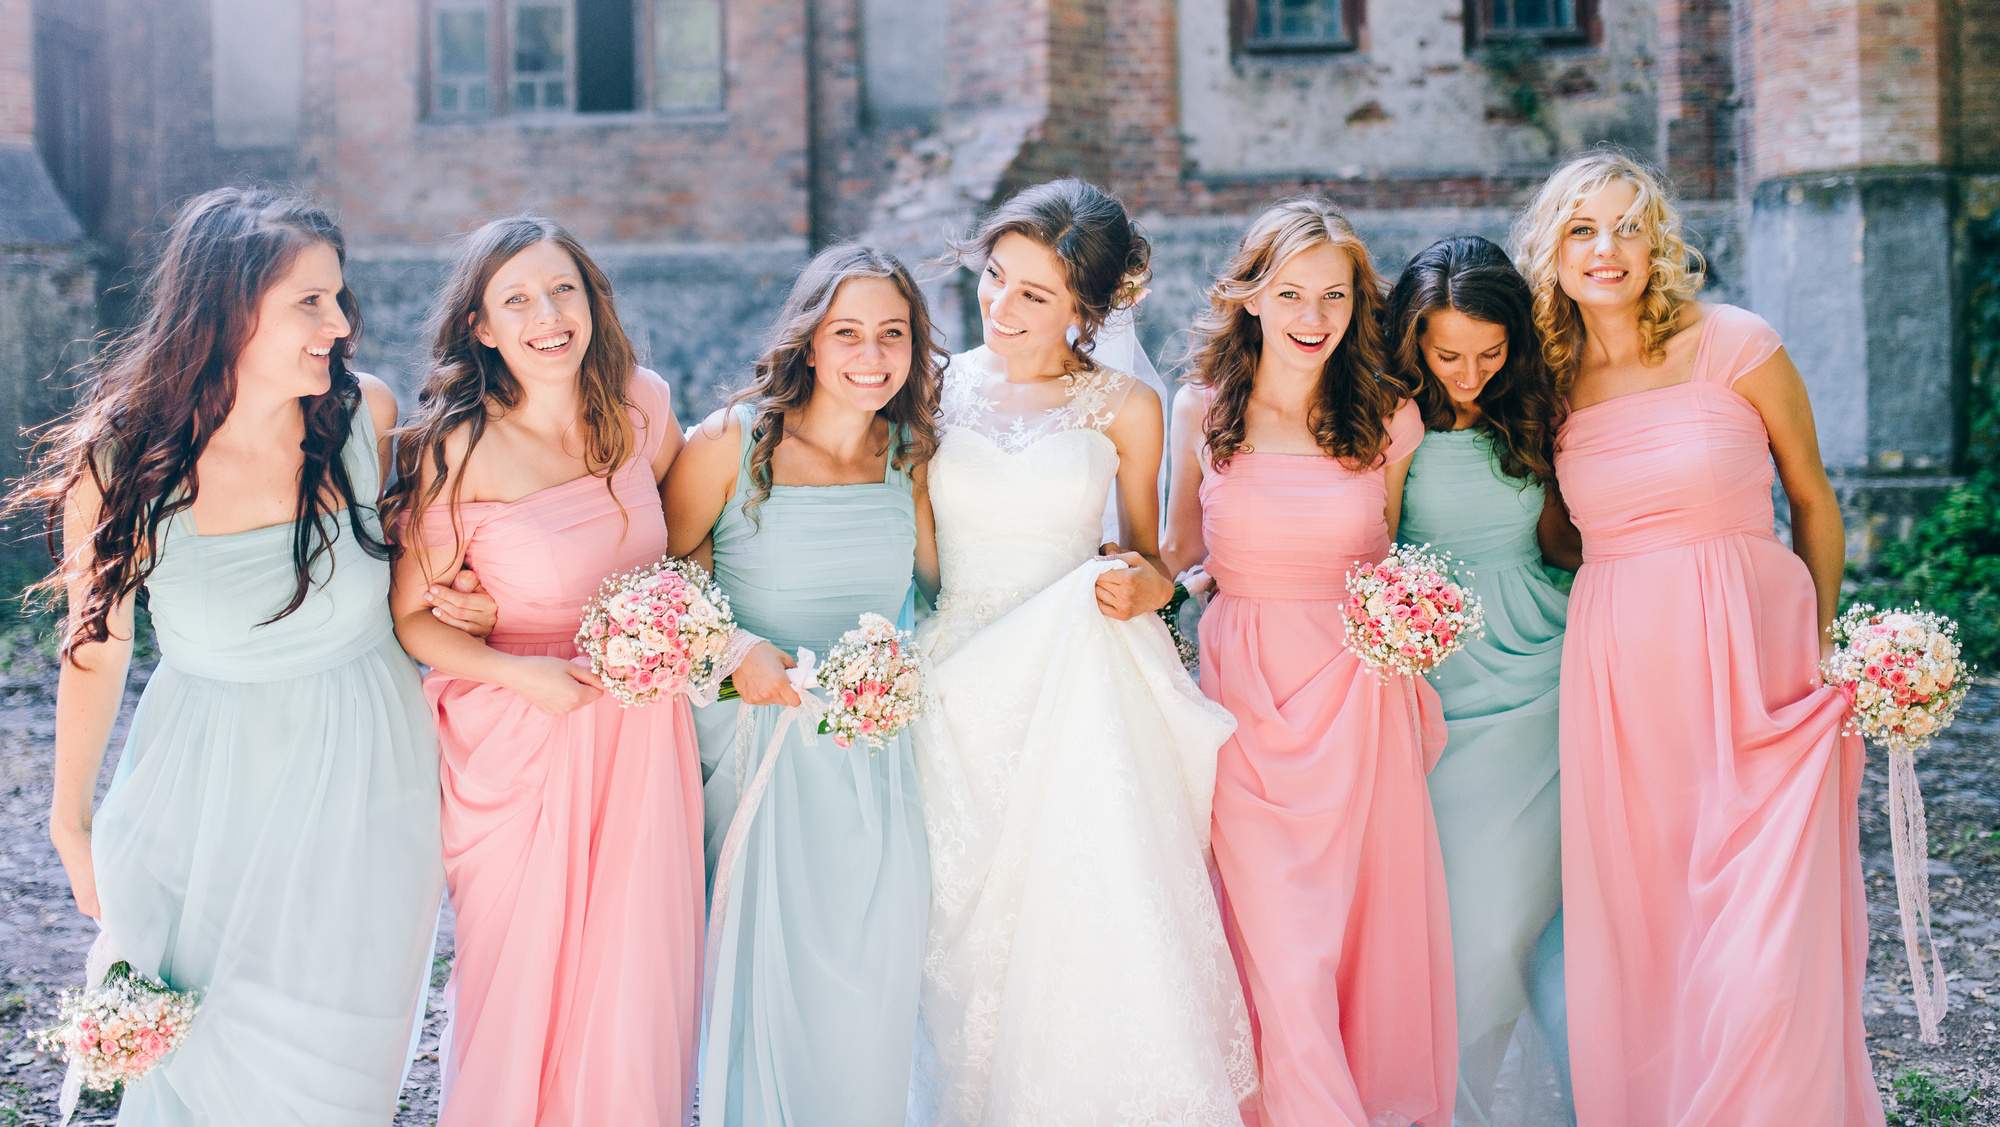 3 Beautifully Unconventional Styles of Bridesmaid Dresses